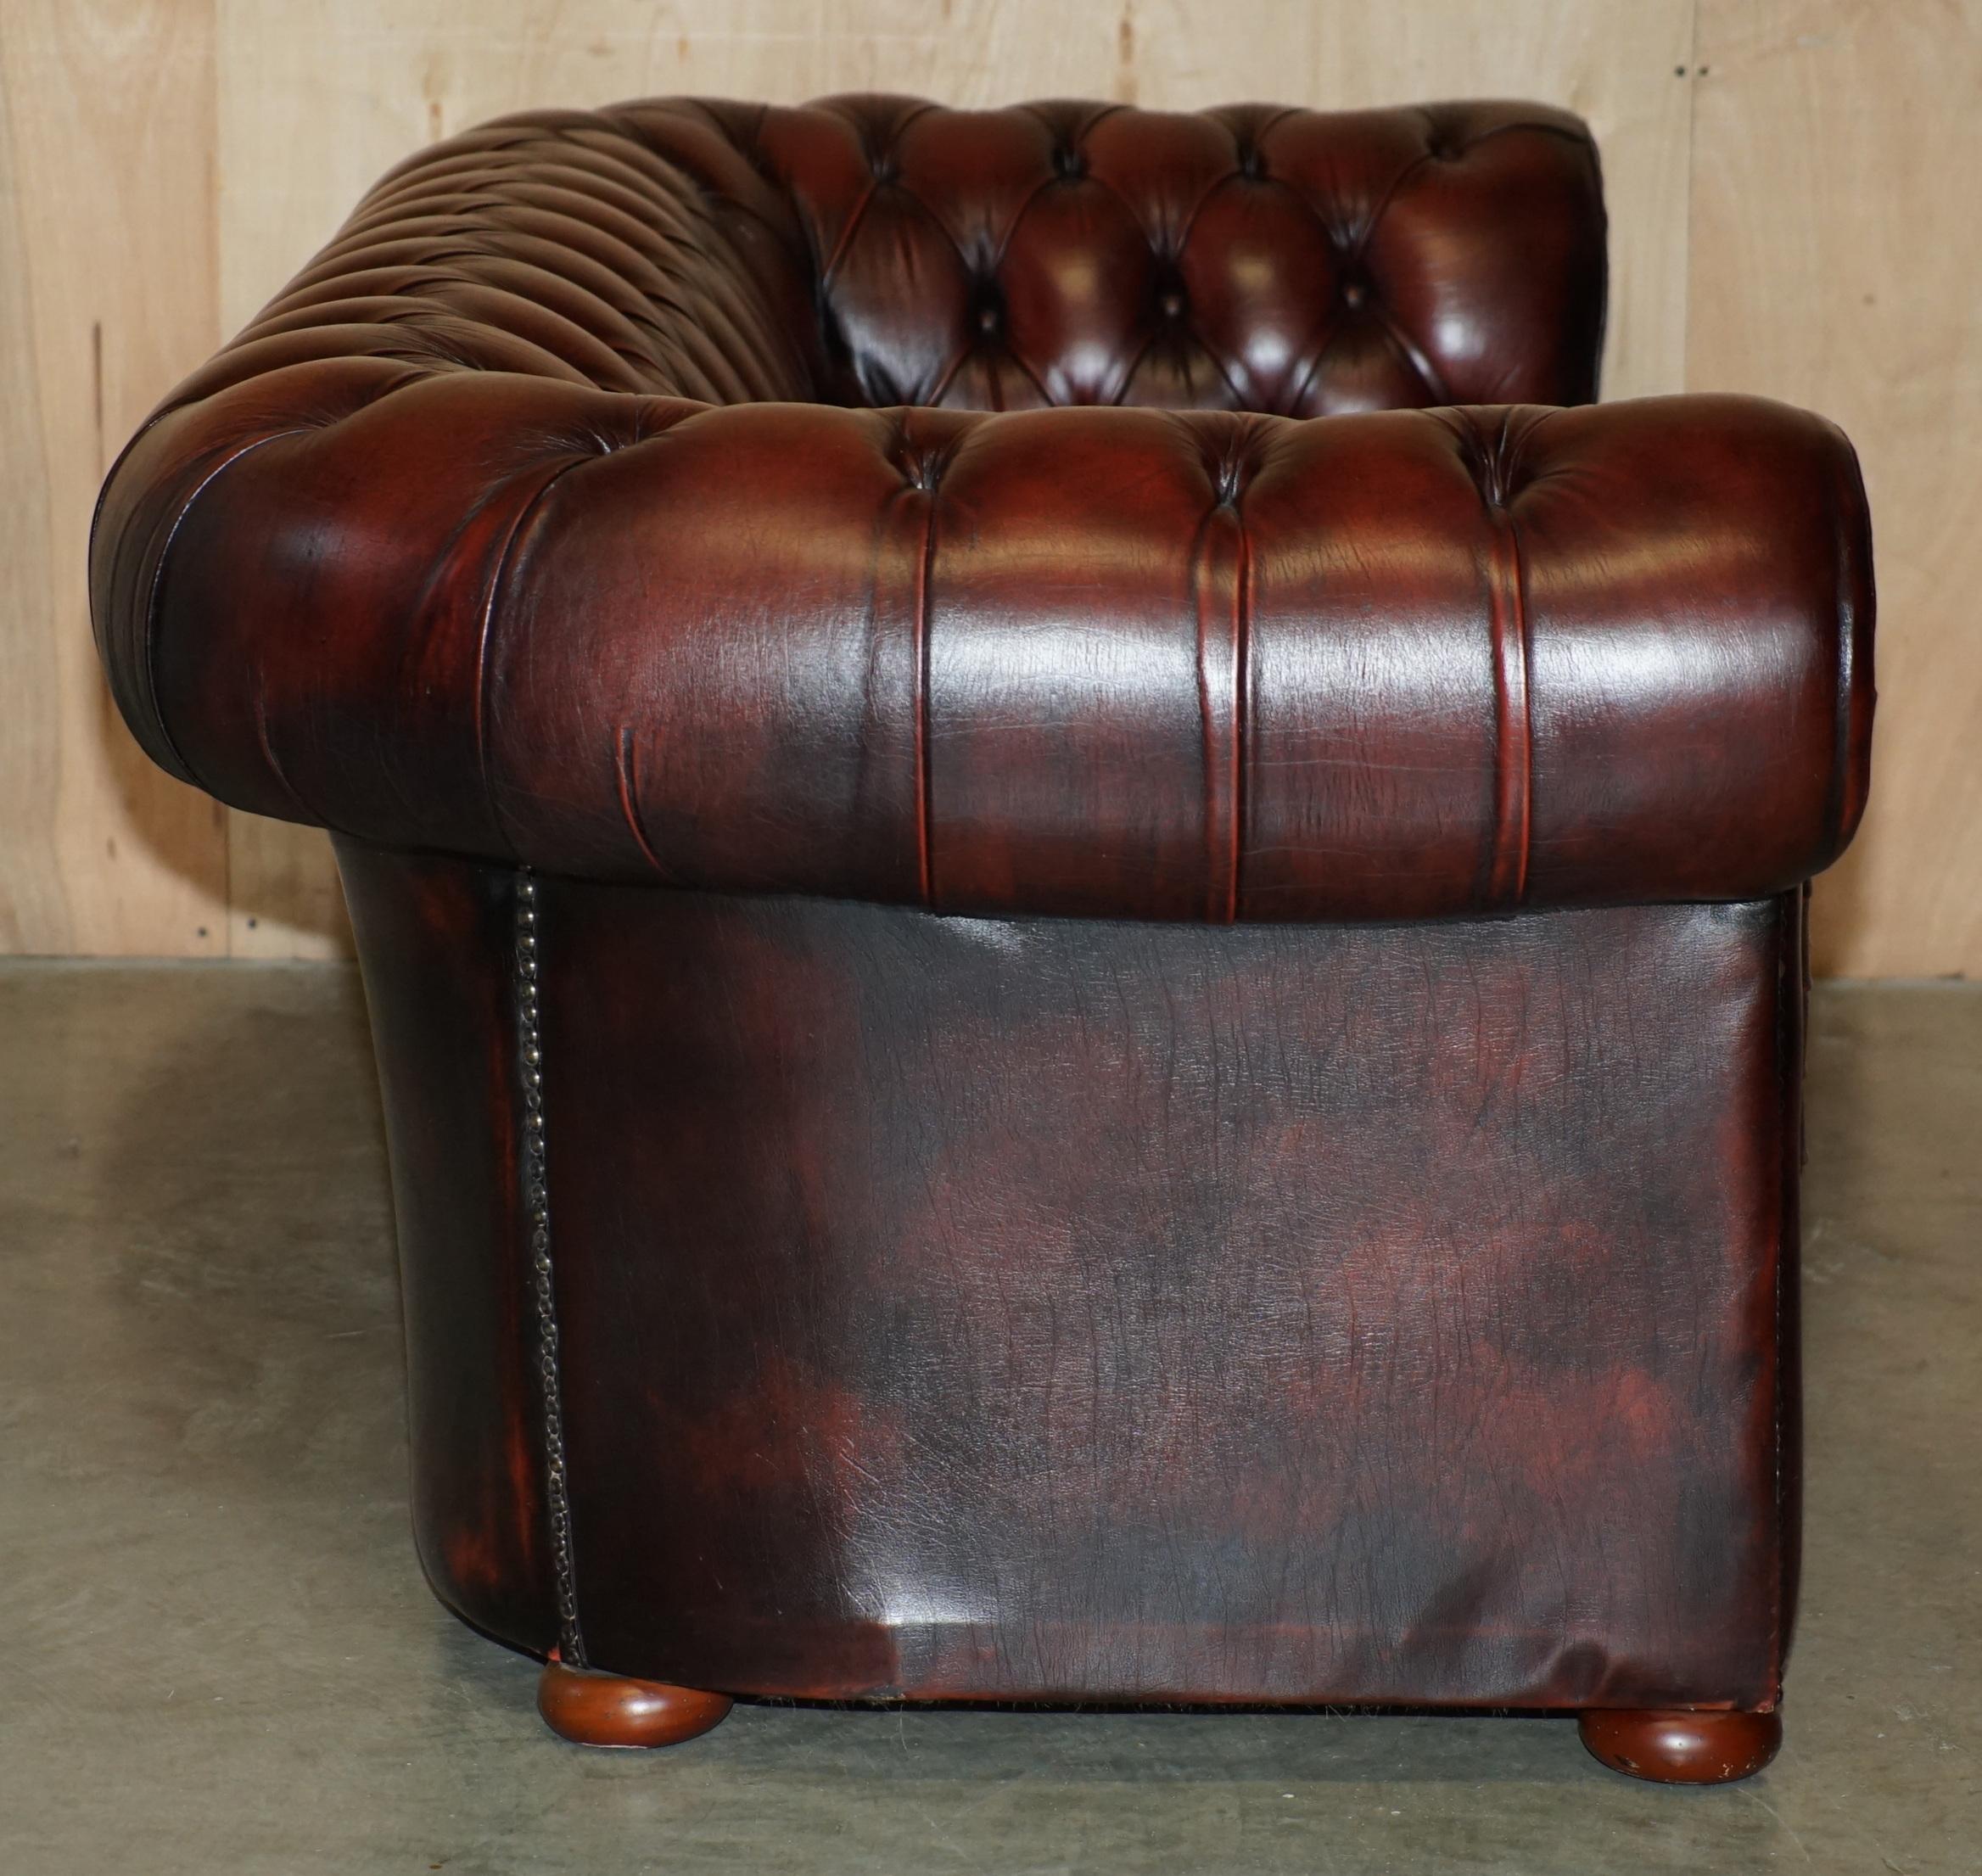 STUNNING FULLY RESTORED ENGLISH ViNTAGE BORDEAUX LEATHER CHESTERFIELD CLUB SOFA For Sale 8